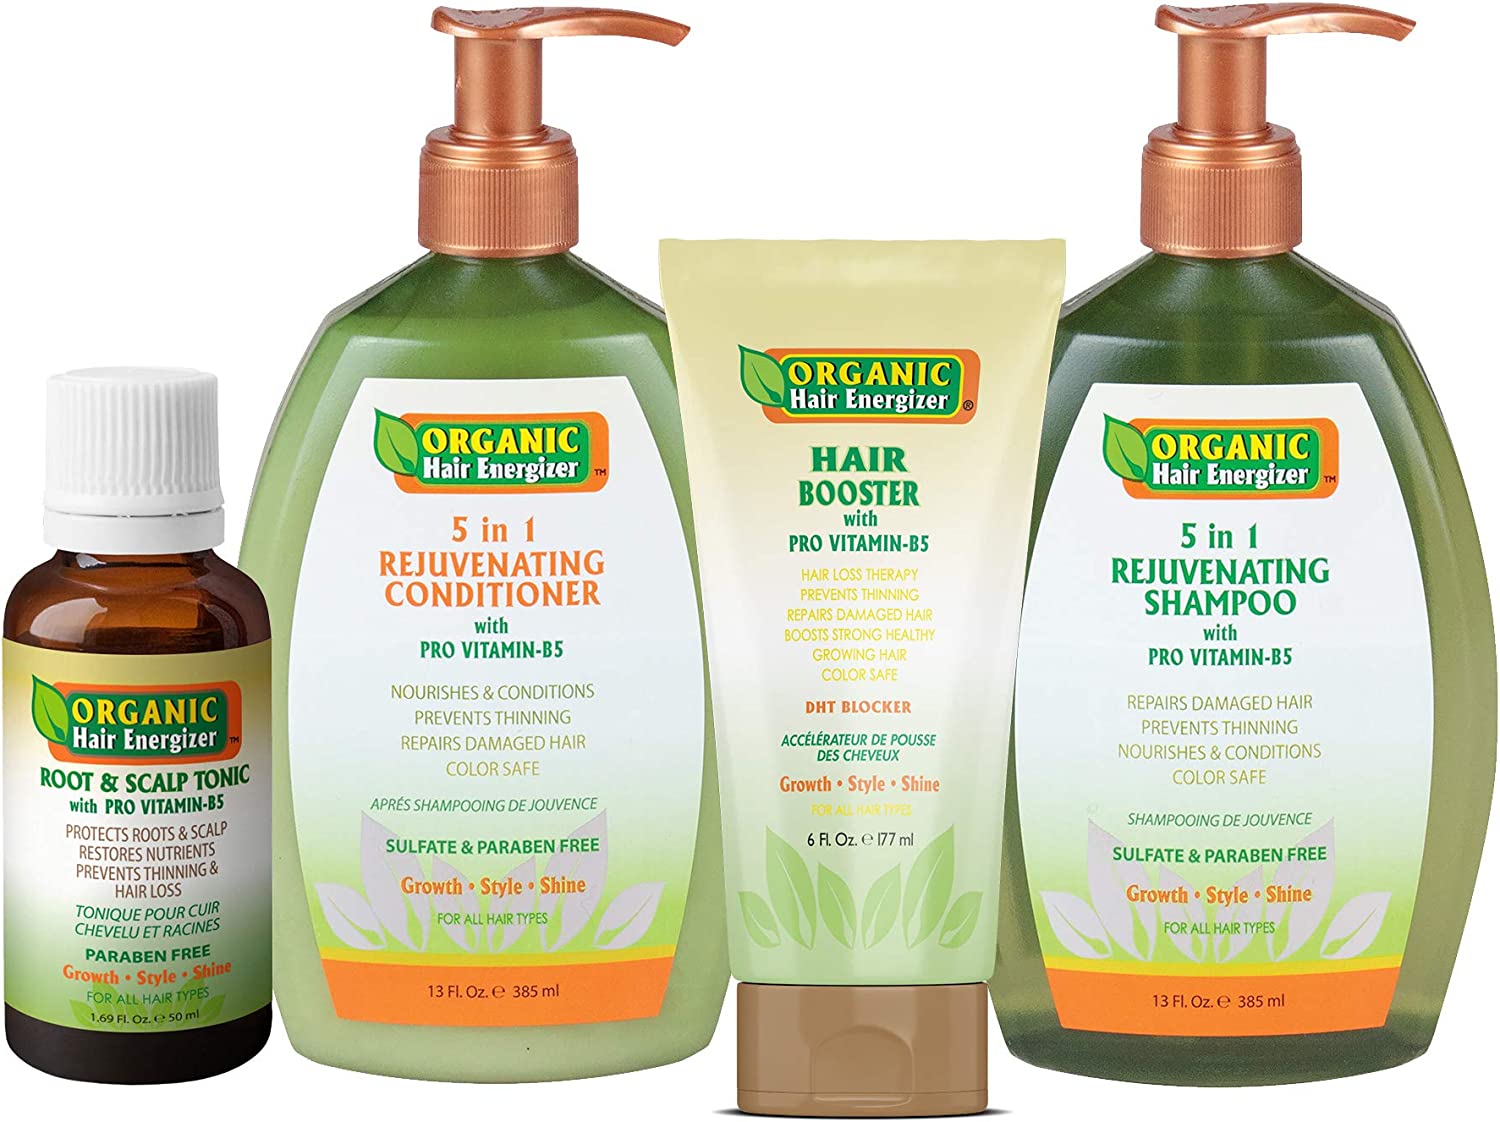 6 Reasons to Use Organic Hair Products